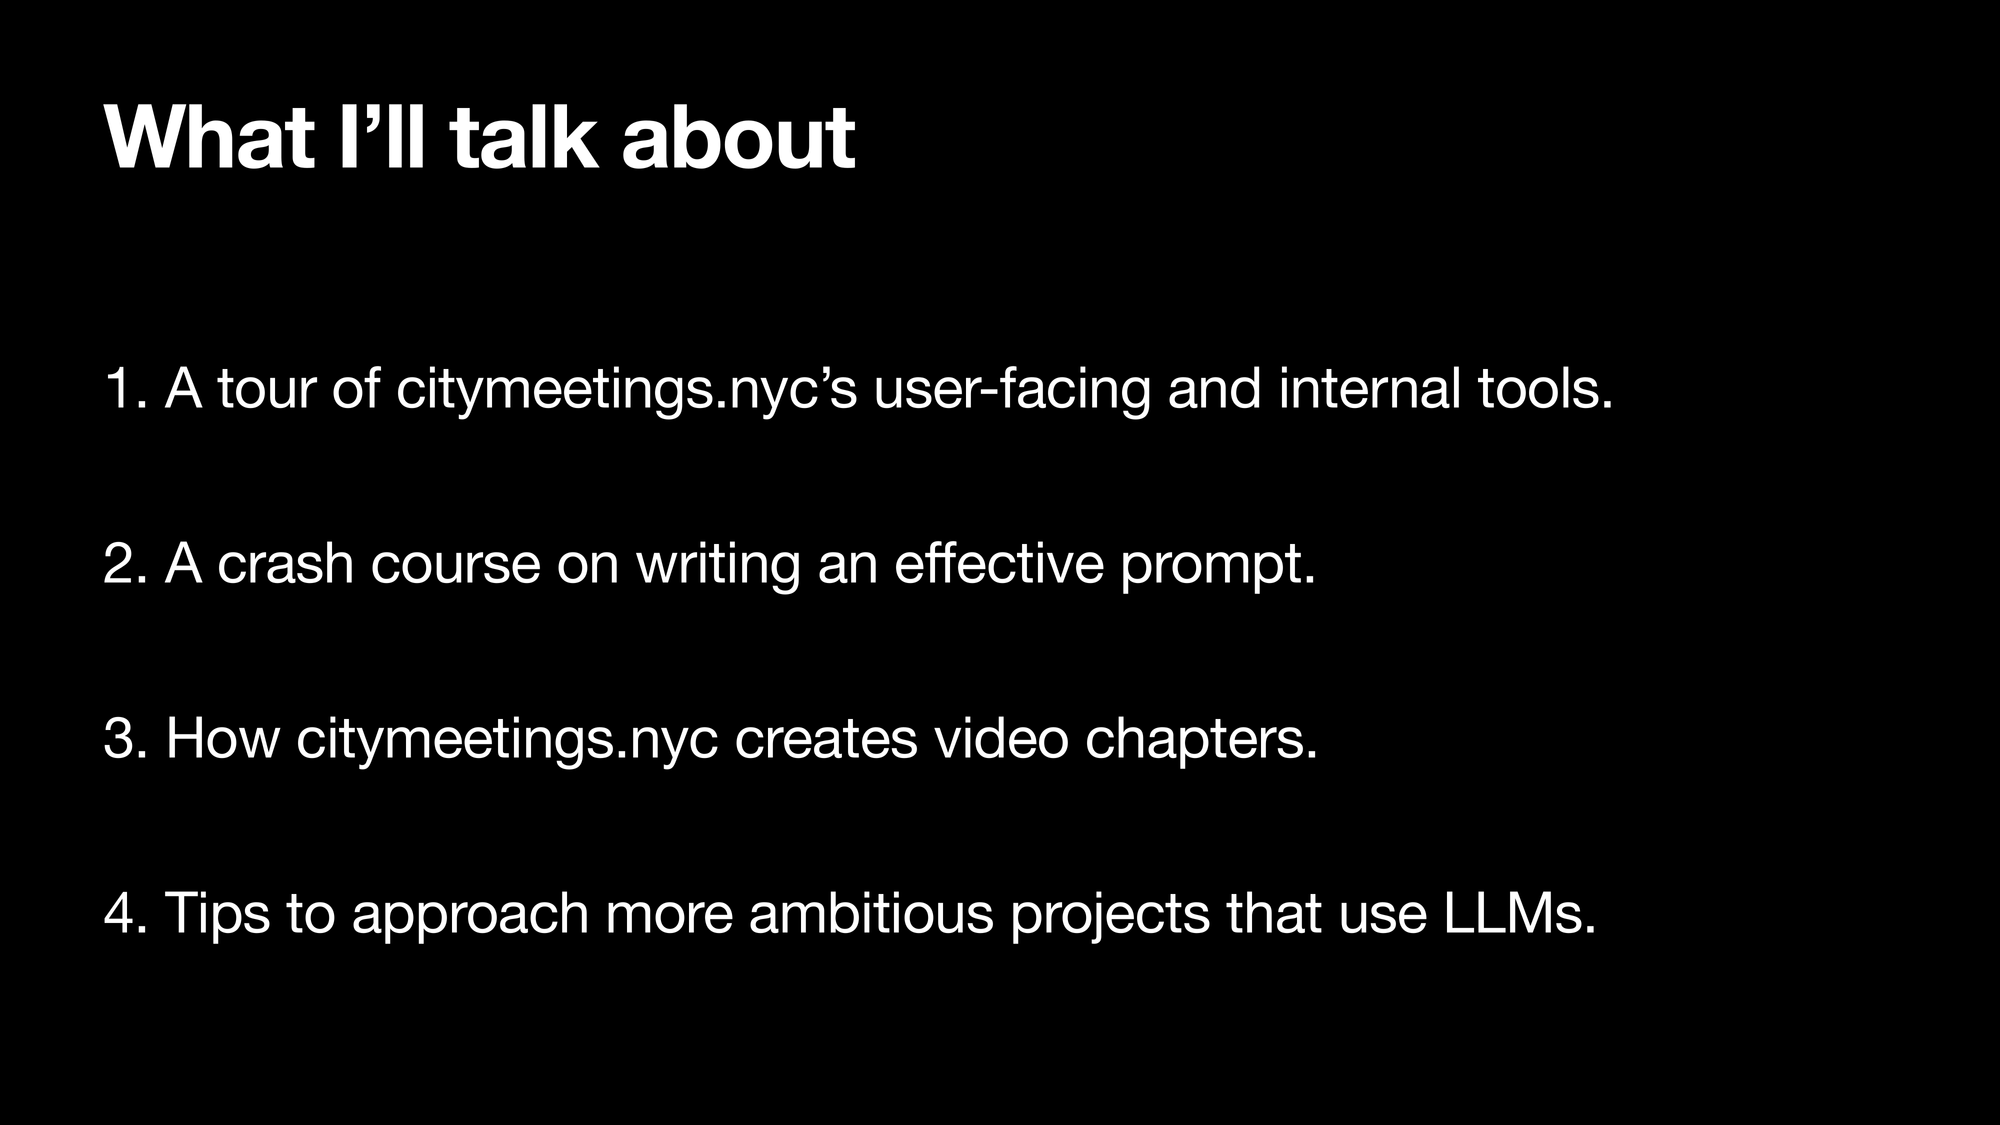 What I’ll talk about: 1. A tour of citymeetings.nyc’s user-facing and internal tools. 2. A crash course on writing an effective prompt. 3. How citymeetings.nyc creates video chapters. 4. Tips to approach more ambitious projects that use LLMSs.
